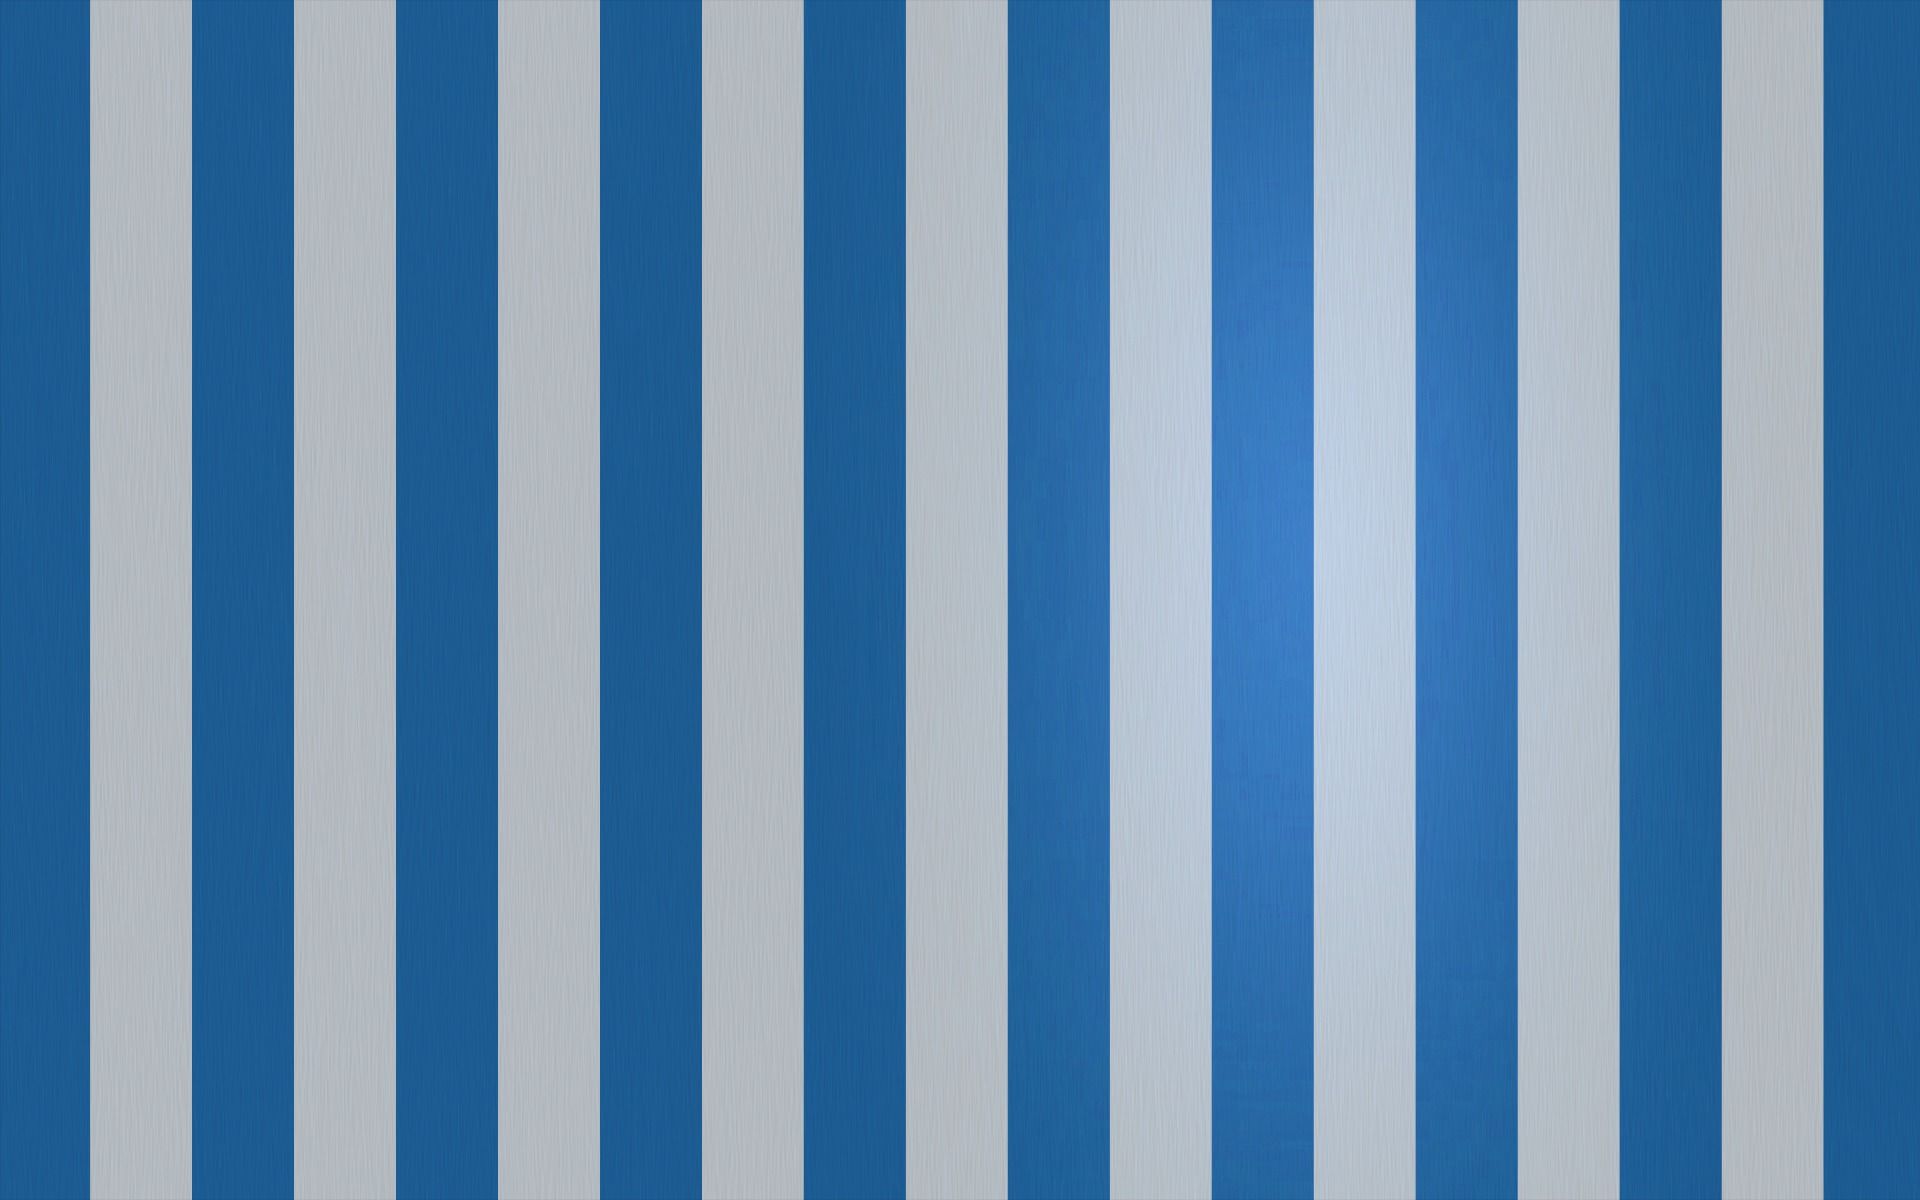 Blue and White Striped Wallpaper Free Blue and White Striped Background